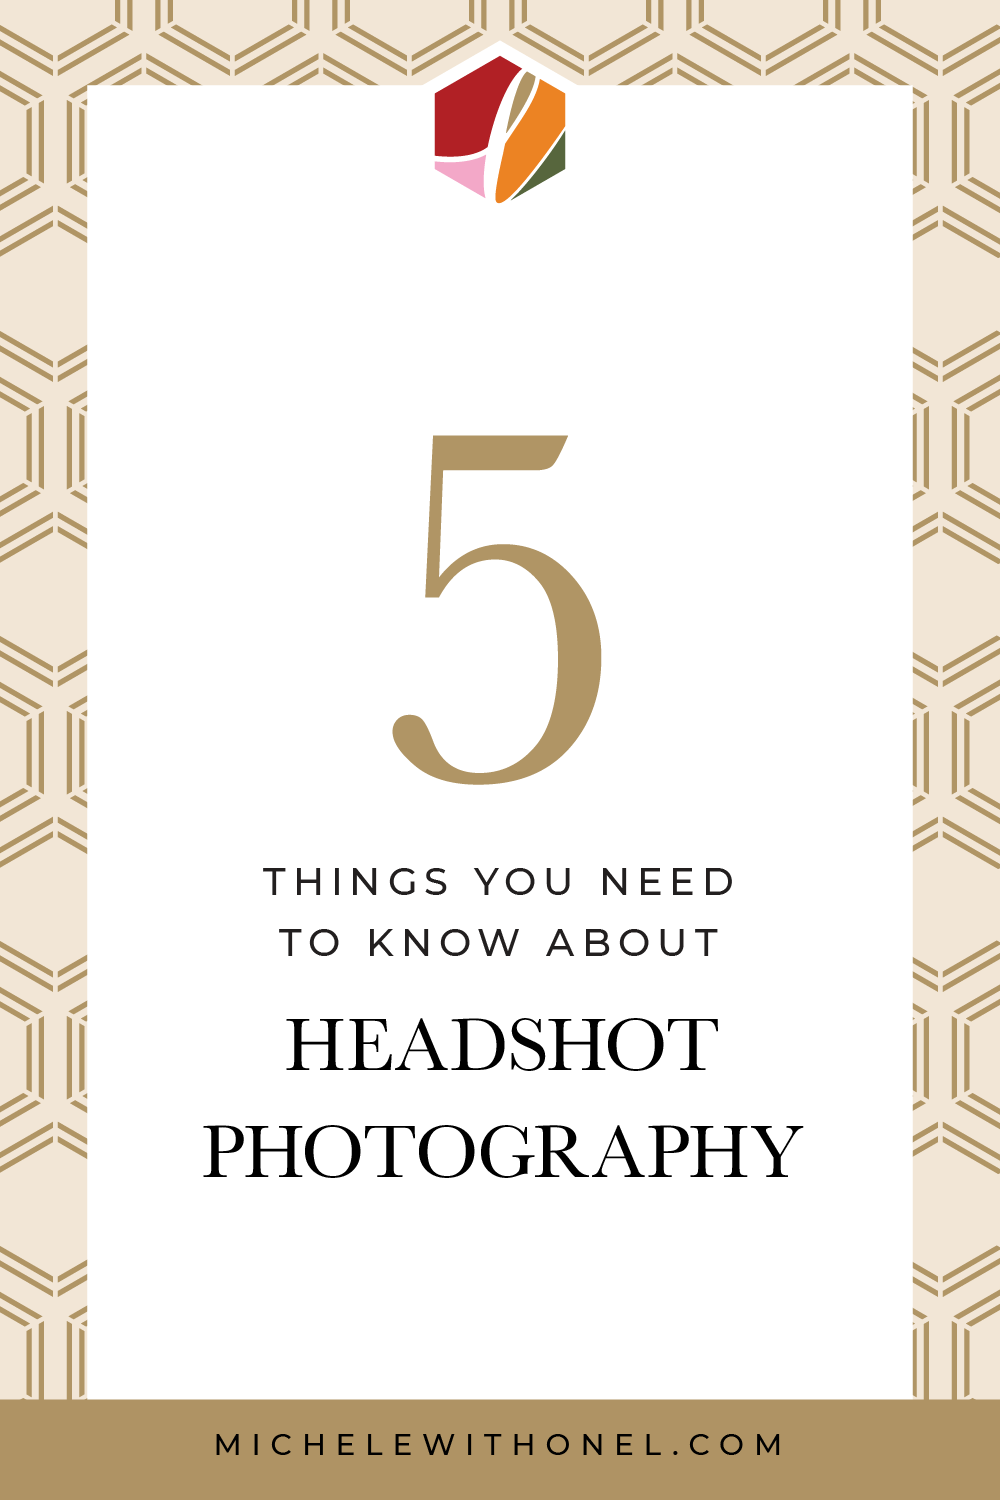 Wondering what personal brand photos can do for your business? This post is for you! Learn the purpose of a personal brand photoshoot and why every entrepreneur needs one—including headshot photography, lifestyle branding, and personal branding photography. #branding #headshots #photography #business